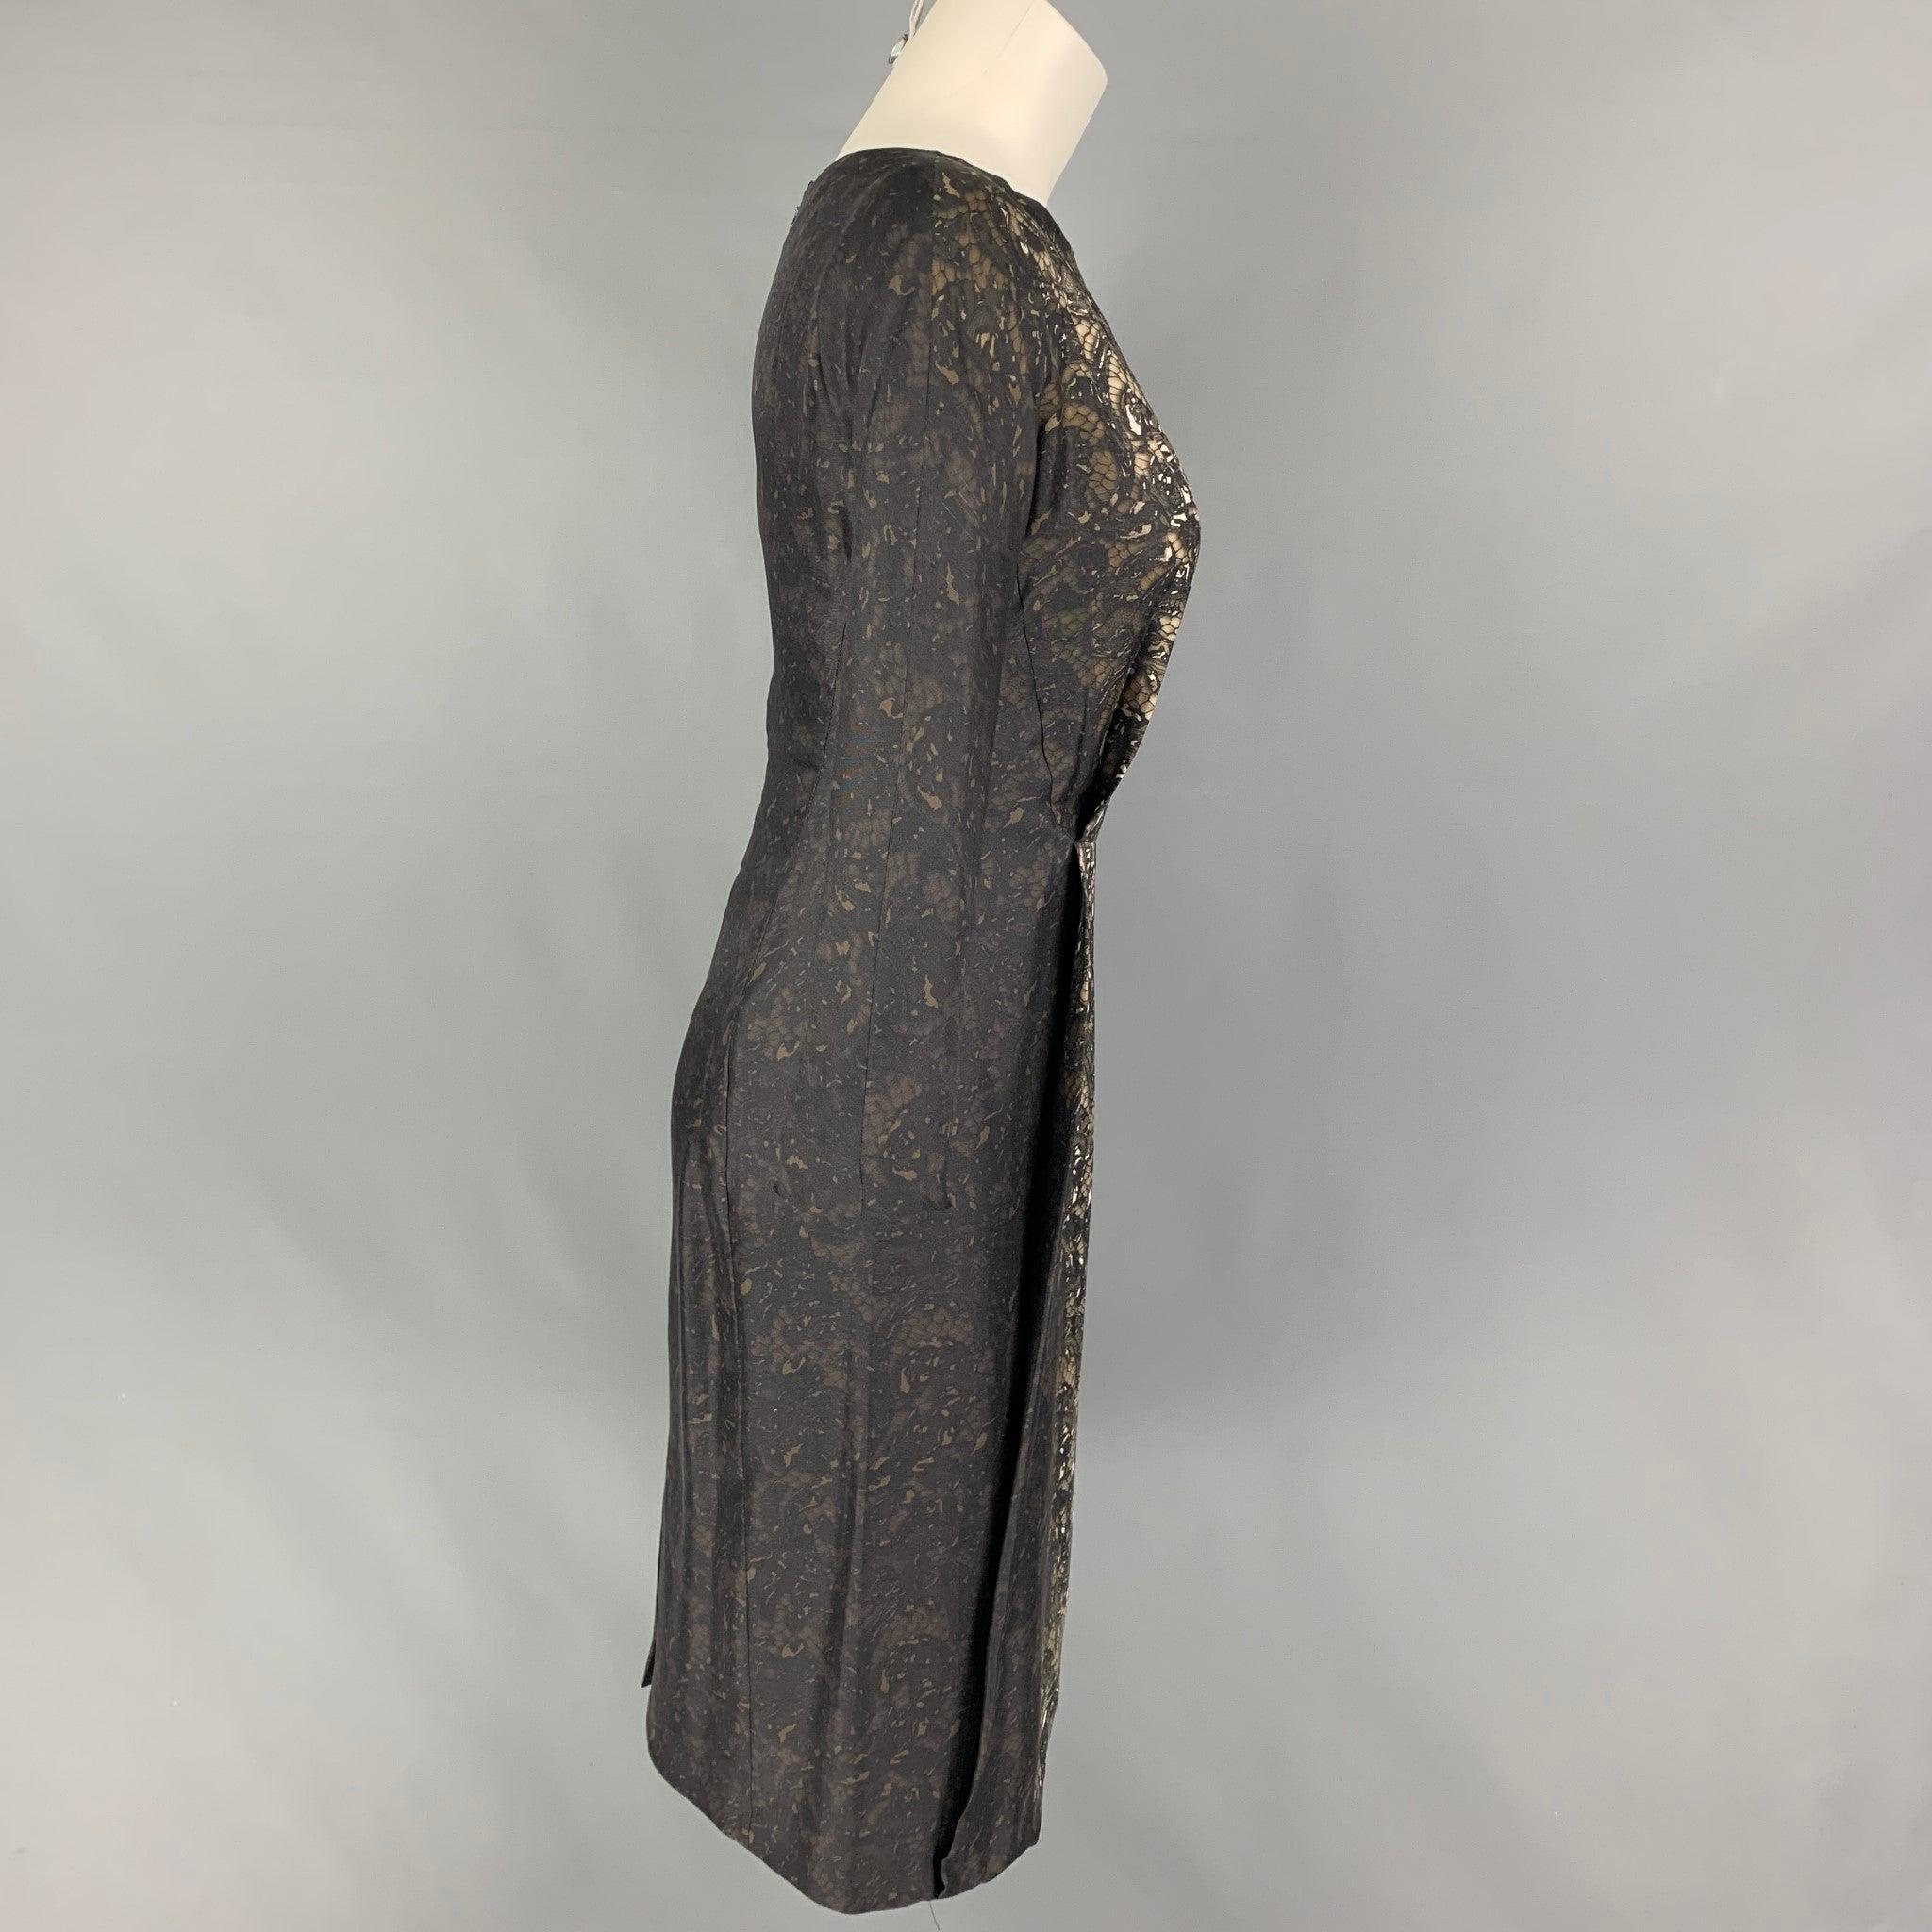 PRADA dress comes in a black & brown lace print silk featuring a a-line style, 3/4 sleeves, and a back zip up closure. Made in Italy.
Very Good
Pre-Owned Condition. 

Marked:   38 

Measurements: 
 
Shoulder: 16.5 inches  Bust: 32 inches  Waist: 26